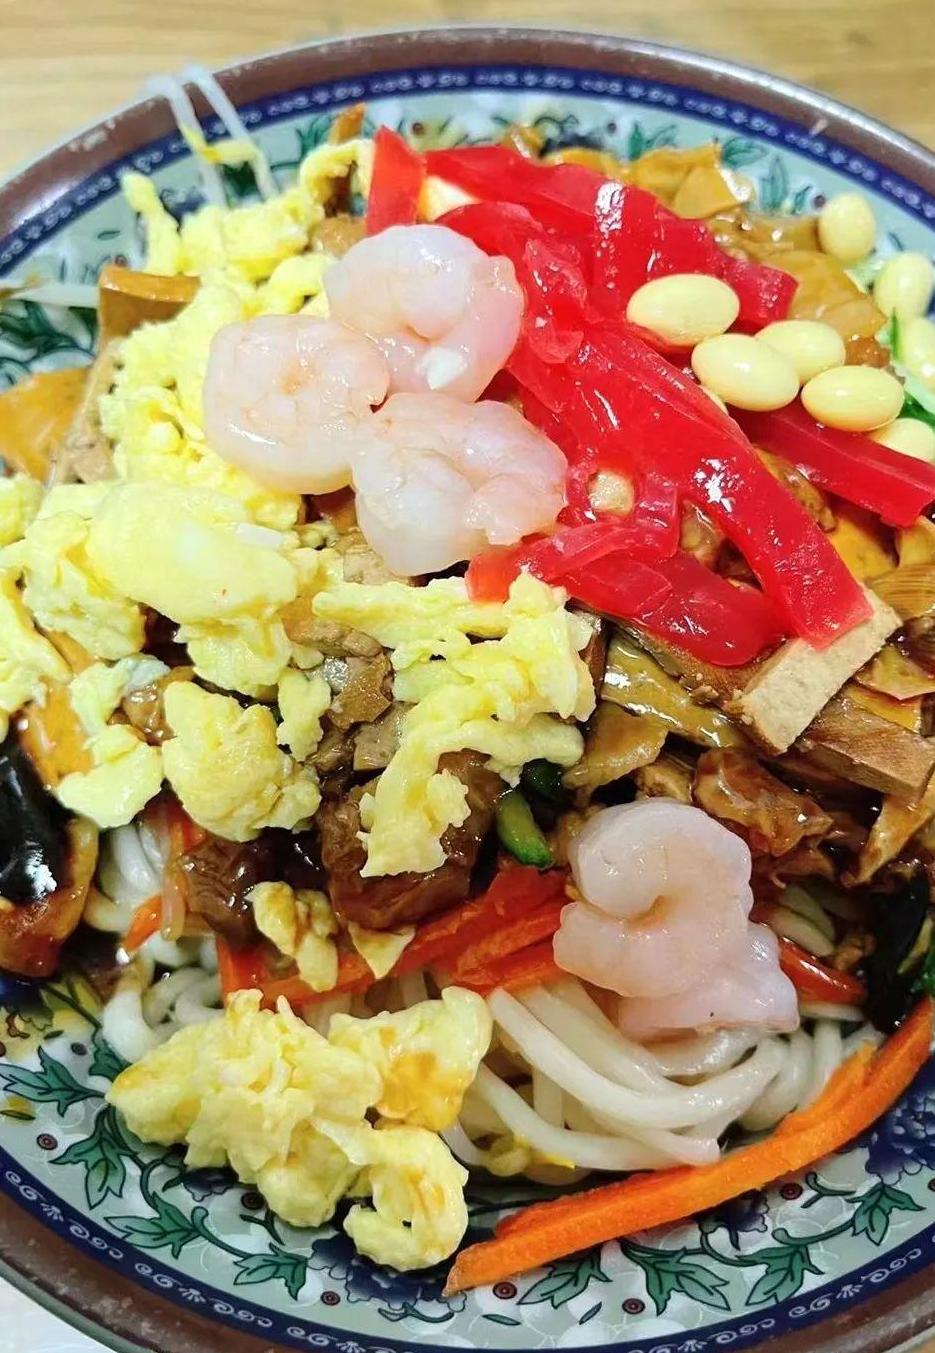 The four dishes of noodles with brine and fried vegetables are very attractive